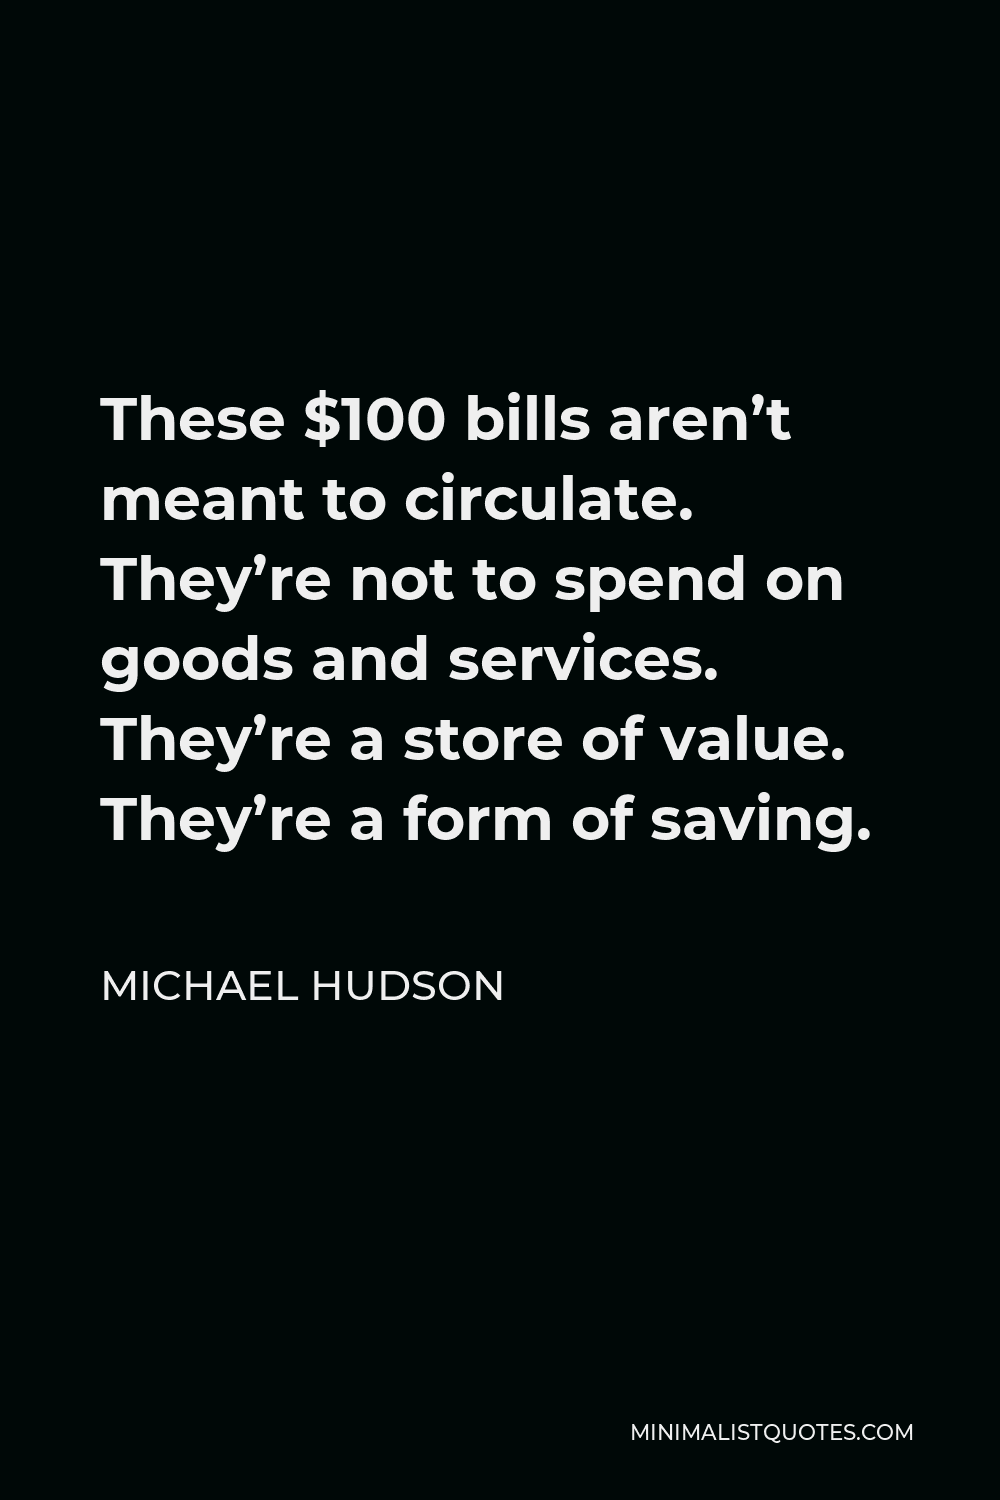 Michael Hudson Quote - These $100 bills aren’t meant to circulate. They’re not to spend on goods and services. They’re a store of value. They’re a form of saving.